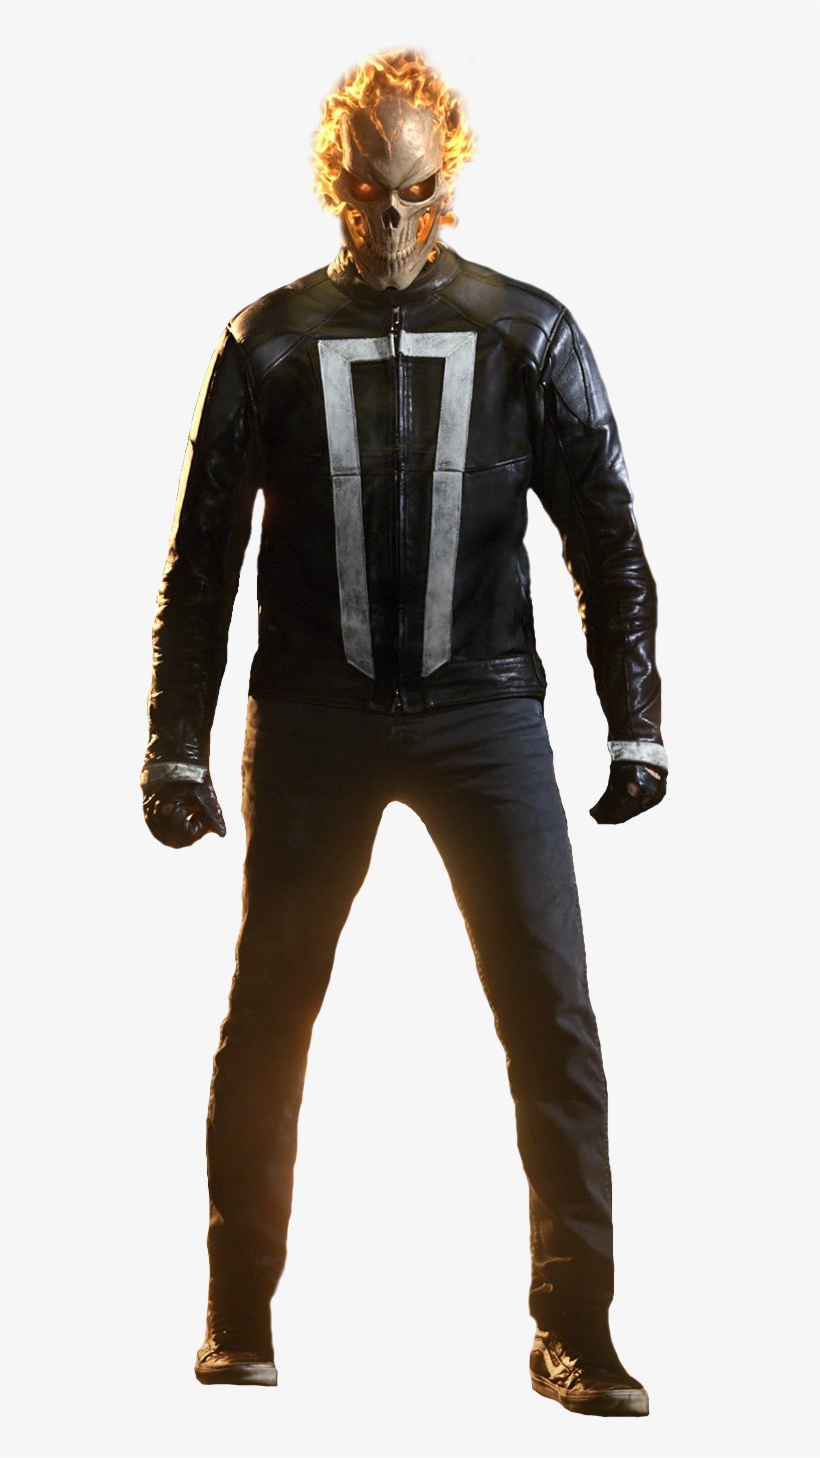 Home To Transparent Superheroes Two Variants Of Agents, transparent png #7027251